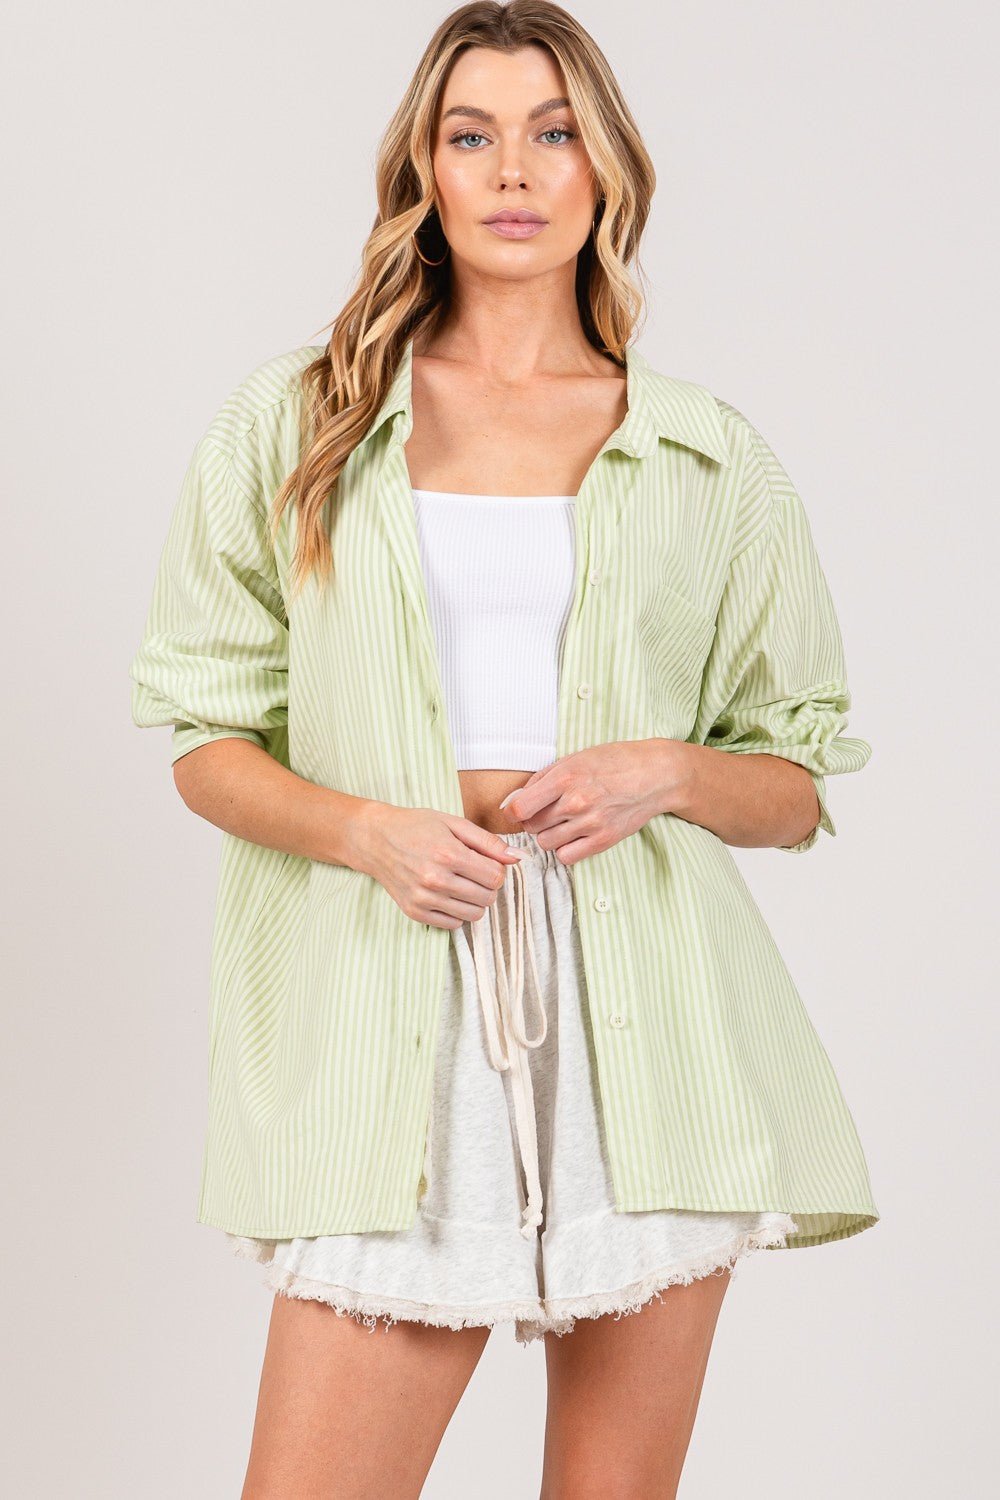 Striped Button Up Long Sleeve Shirt in SageShirtSAGE+FIG